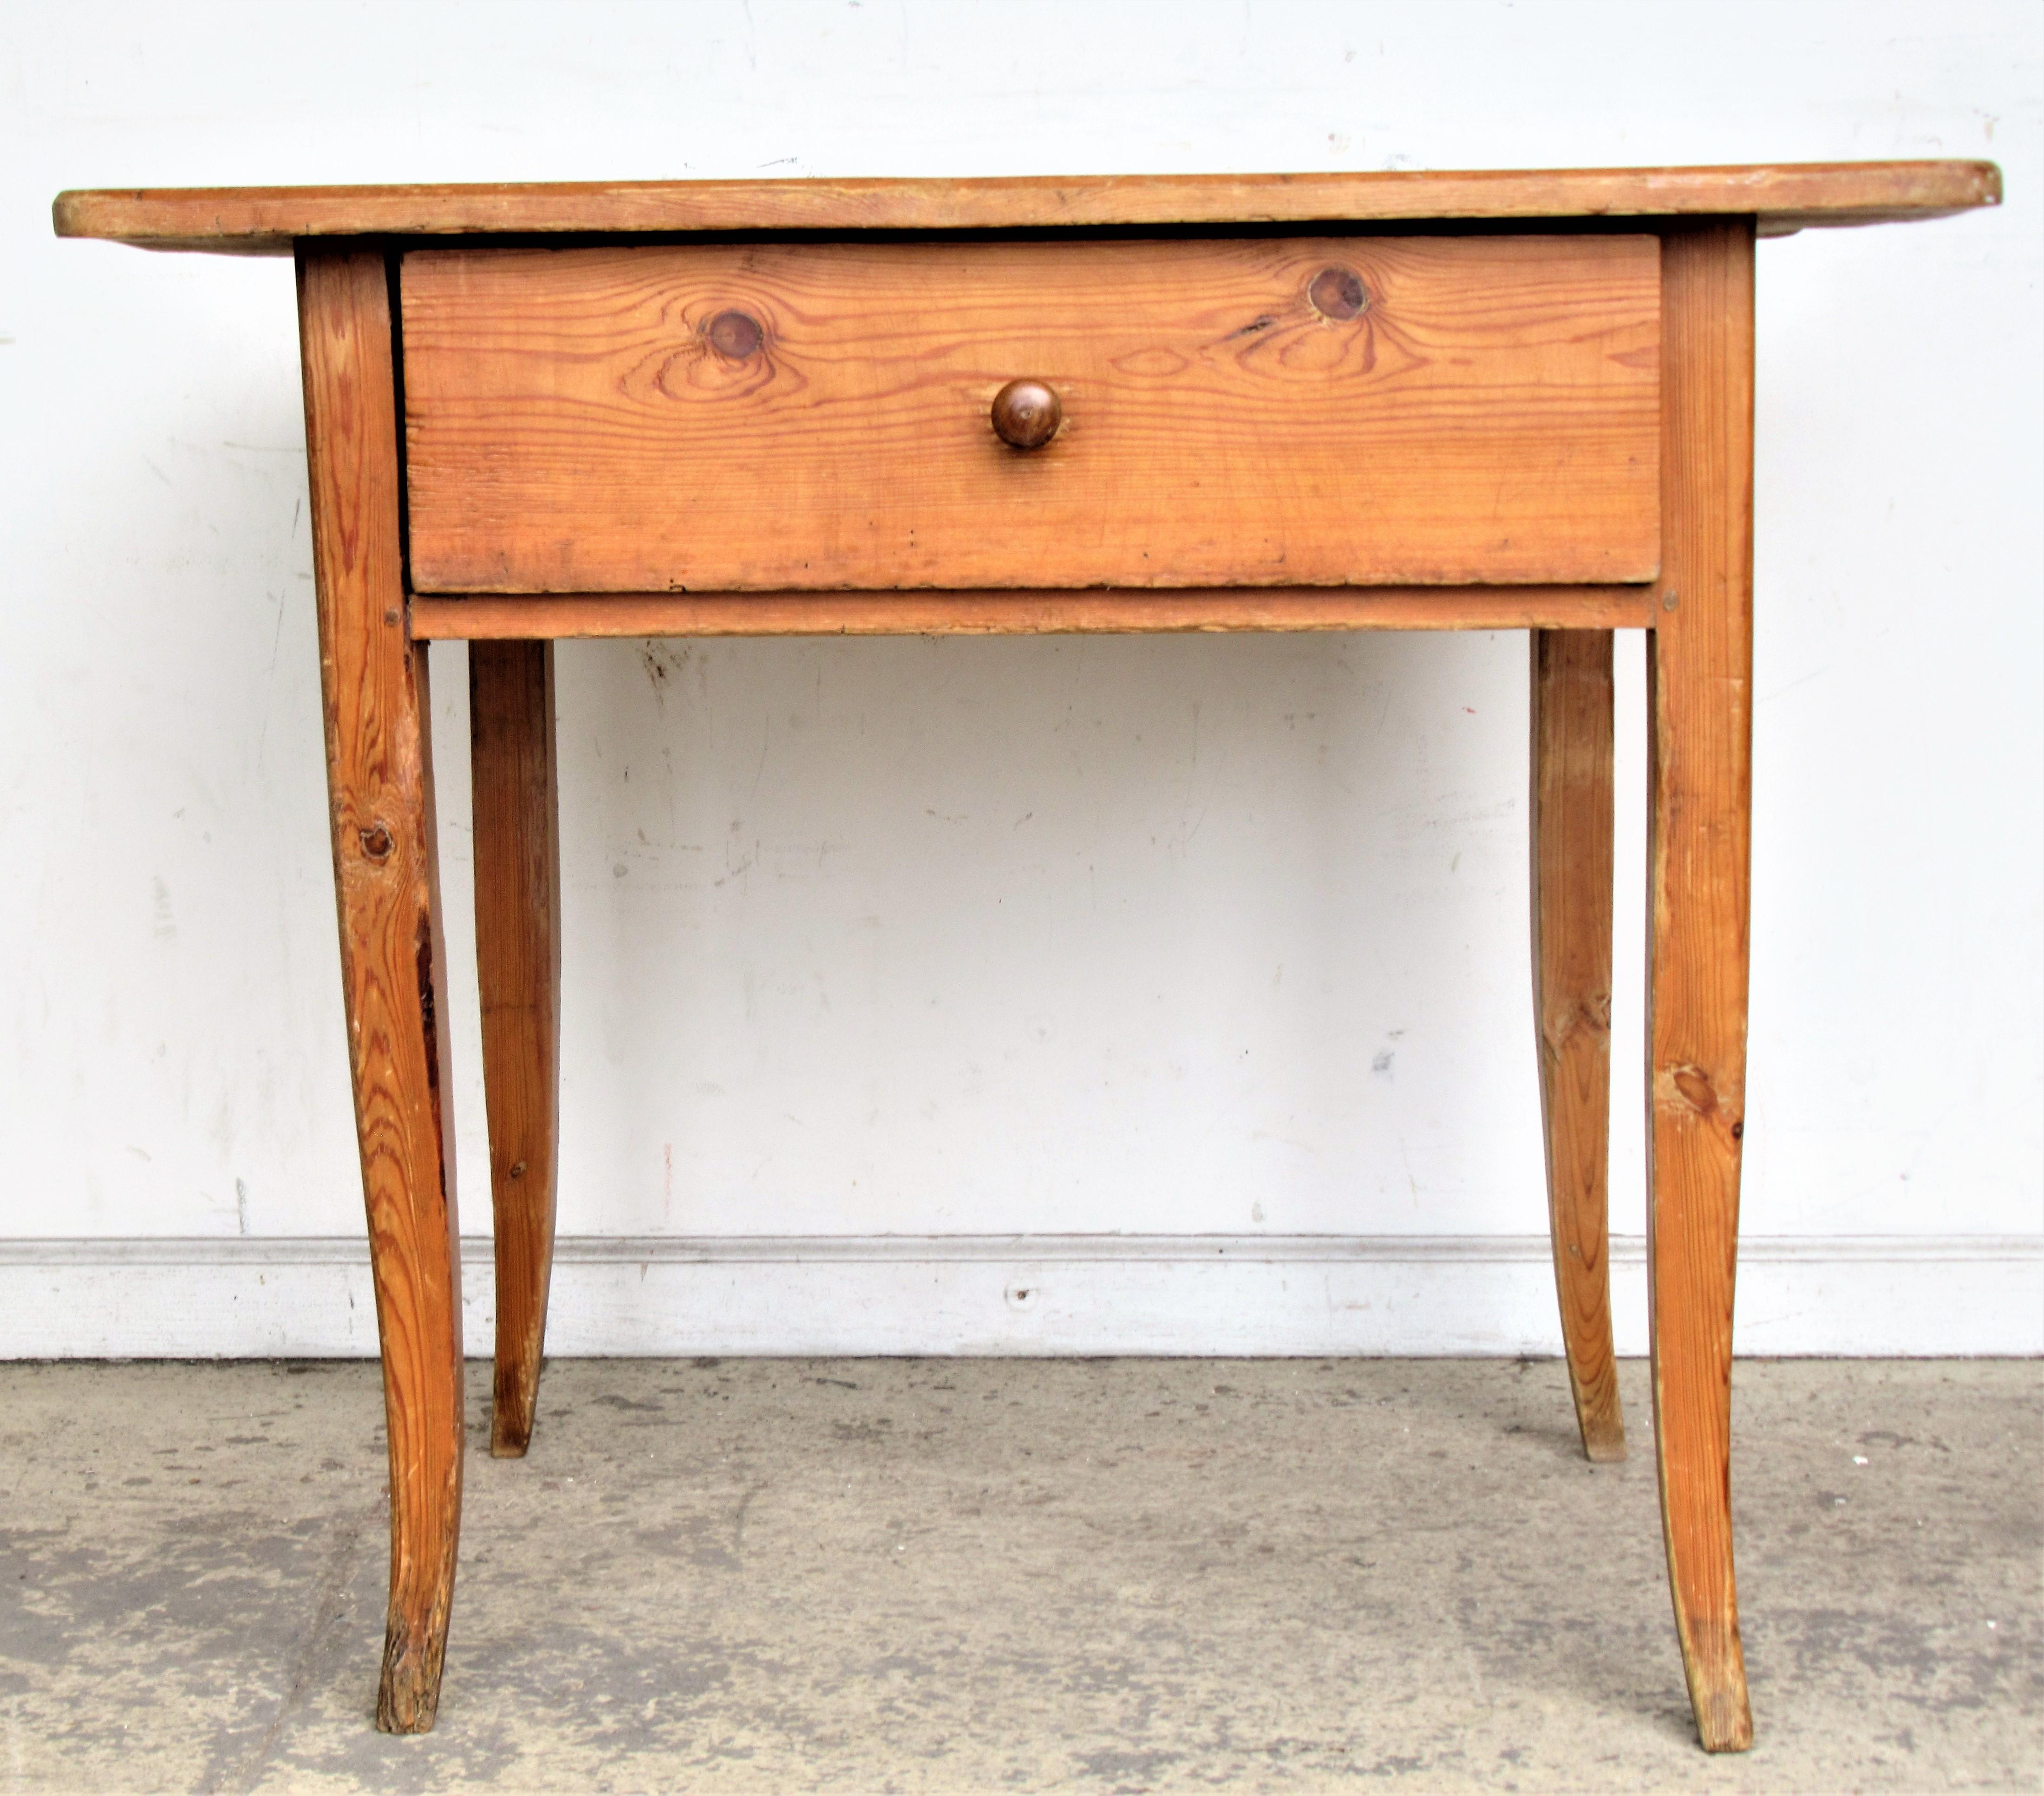 19th century French Canadian yellow pine country work table with one large deep dovetailed / chamfered central drawer, overhanging one board top / cabriole legs / early pegged construction - overall beautifully aged original warm honey colored